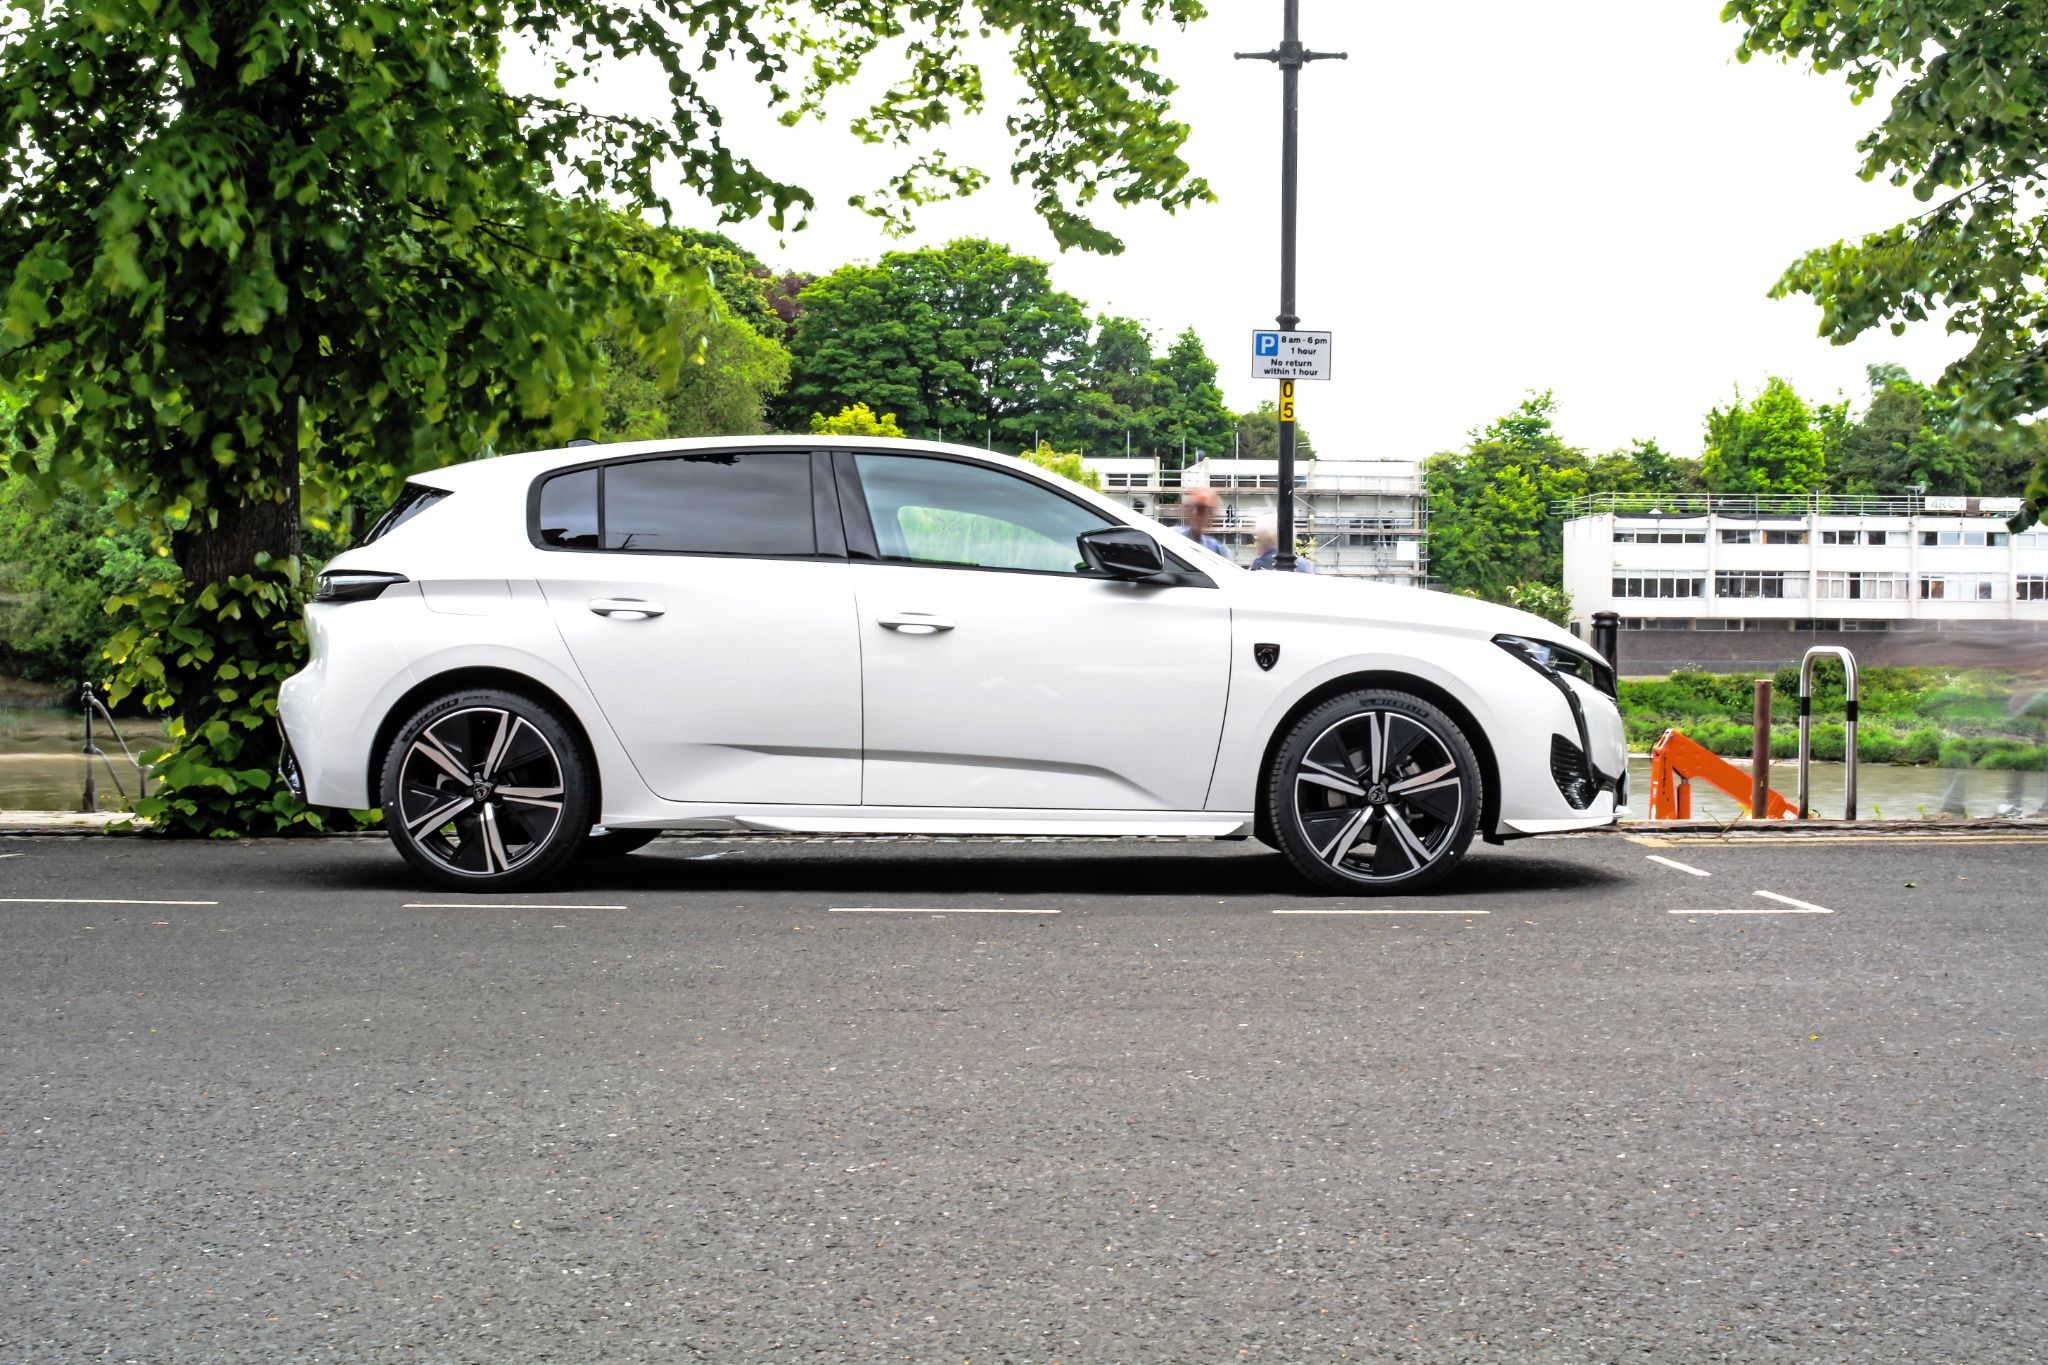 Side view of white Peugeot 308.